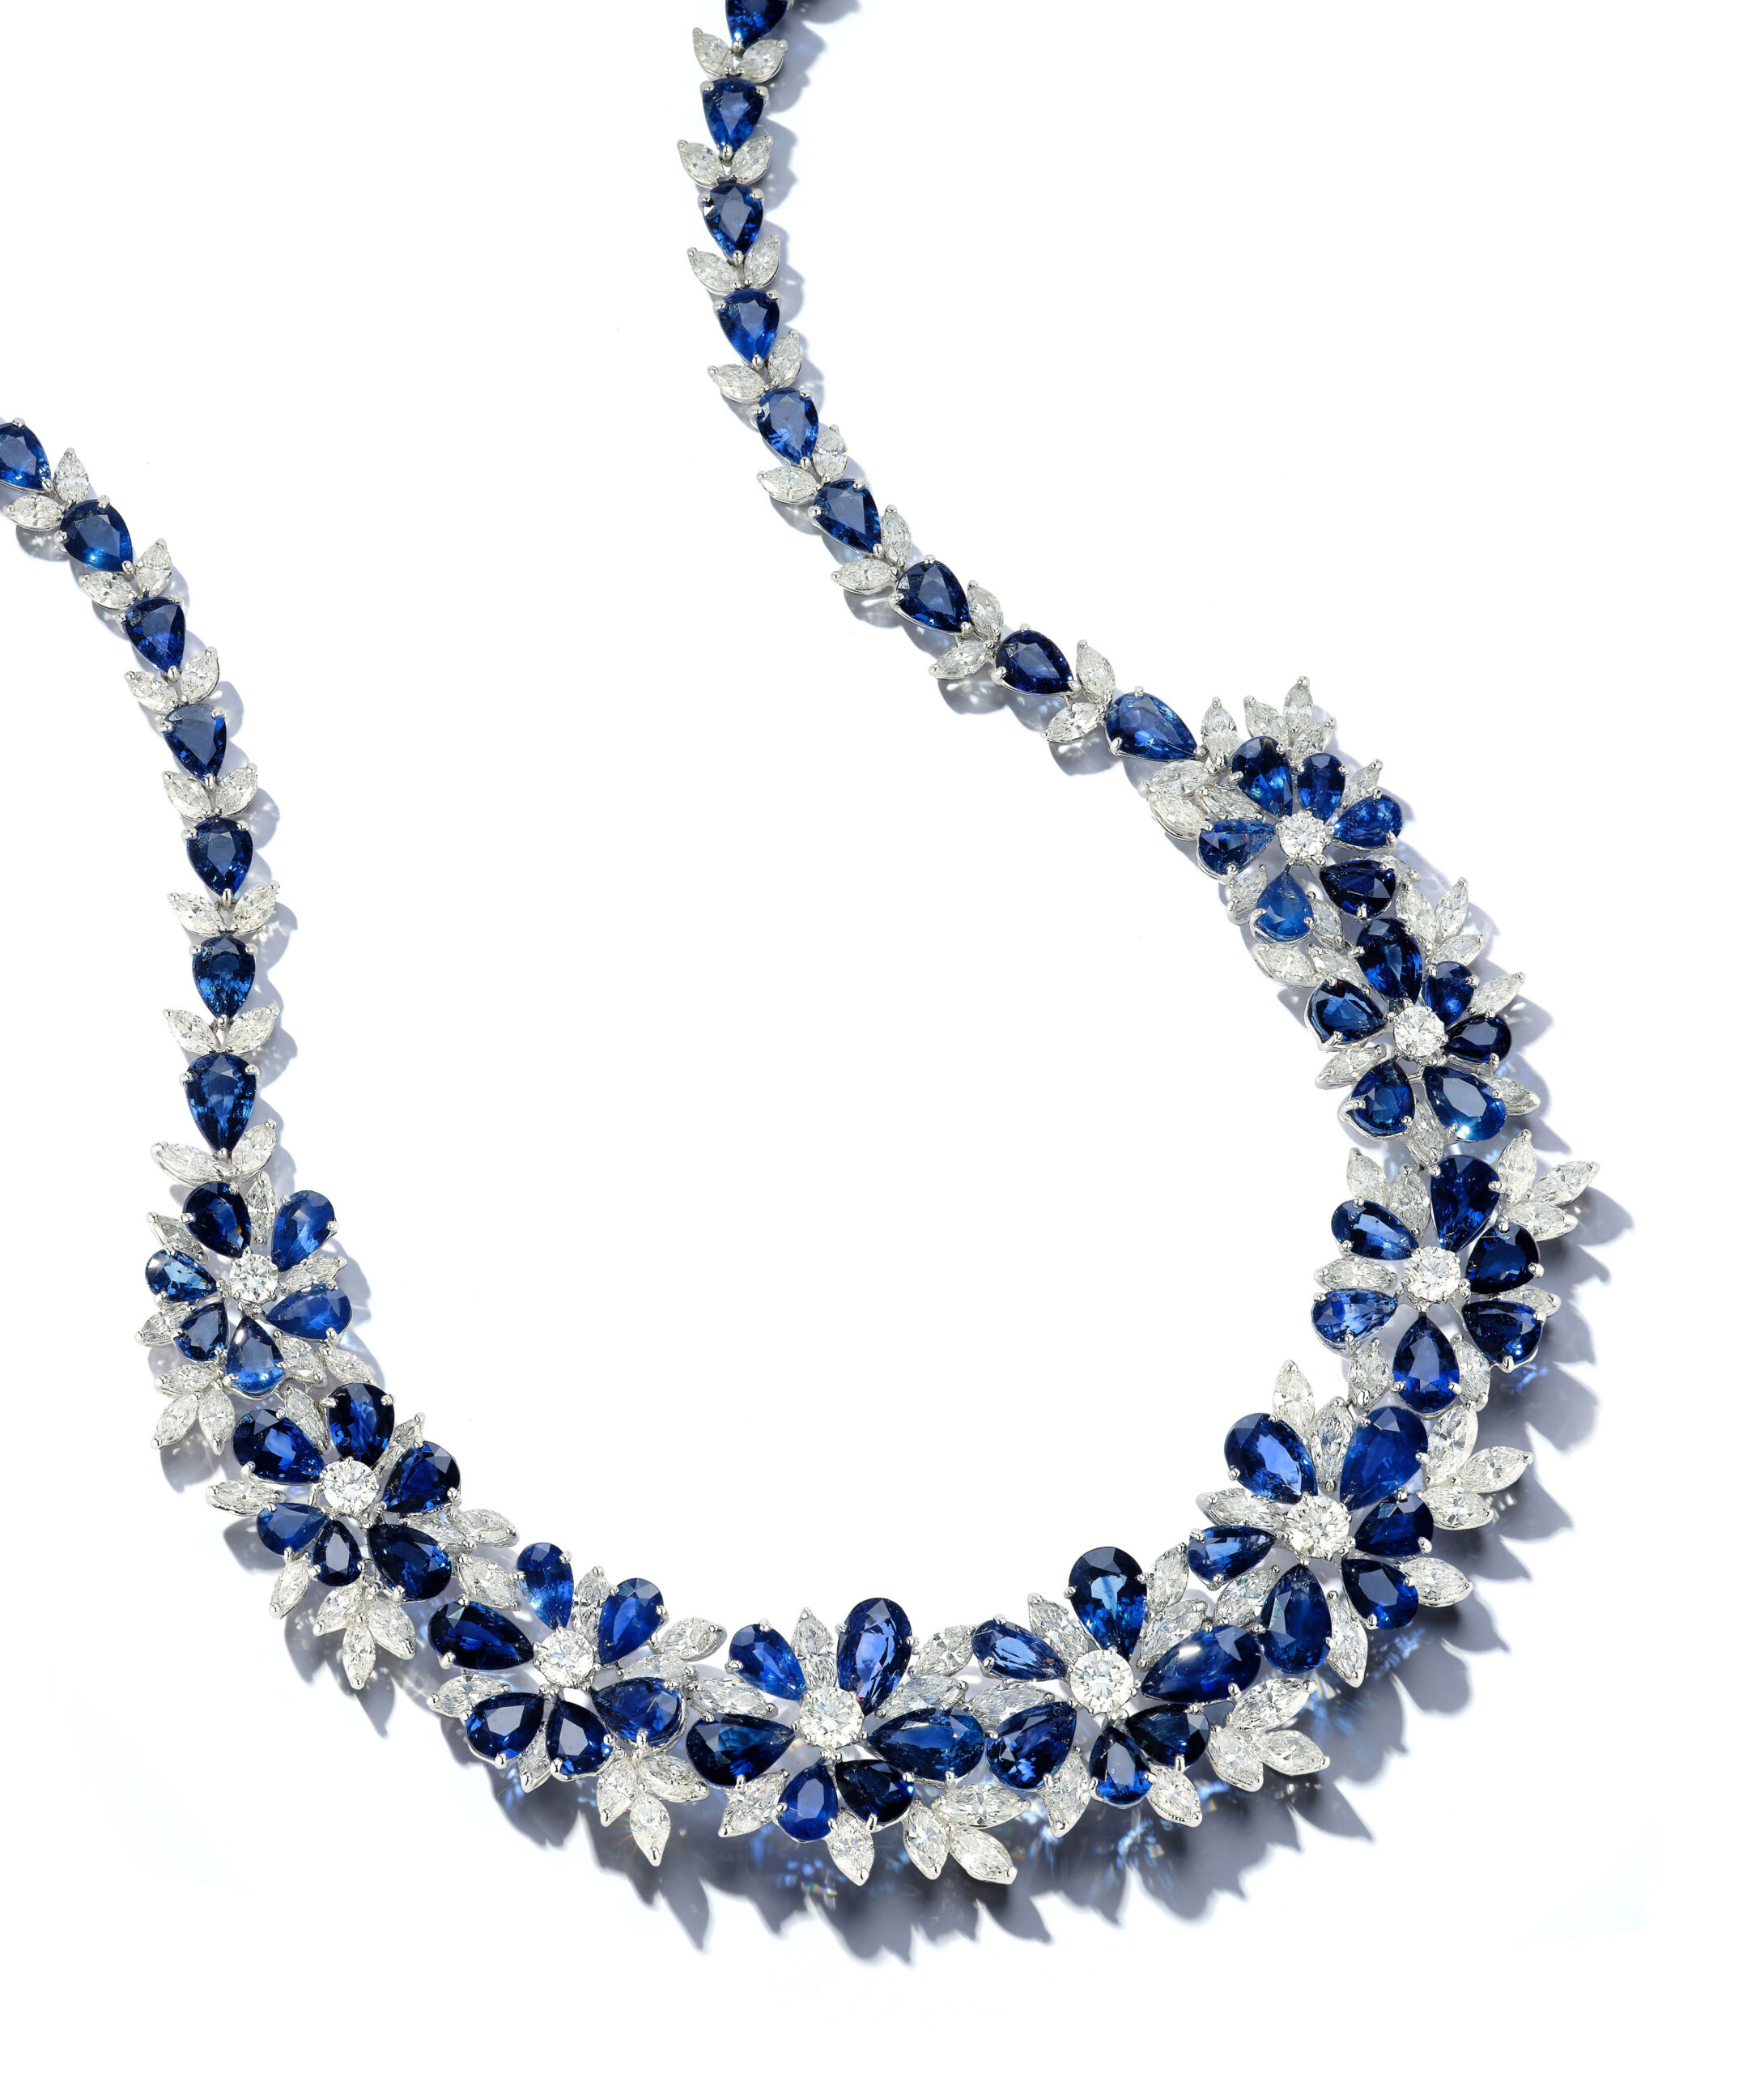 Cobalt Blue Necklace With Art Nouveau White Lace – The Whirlwind